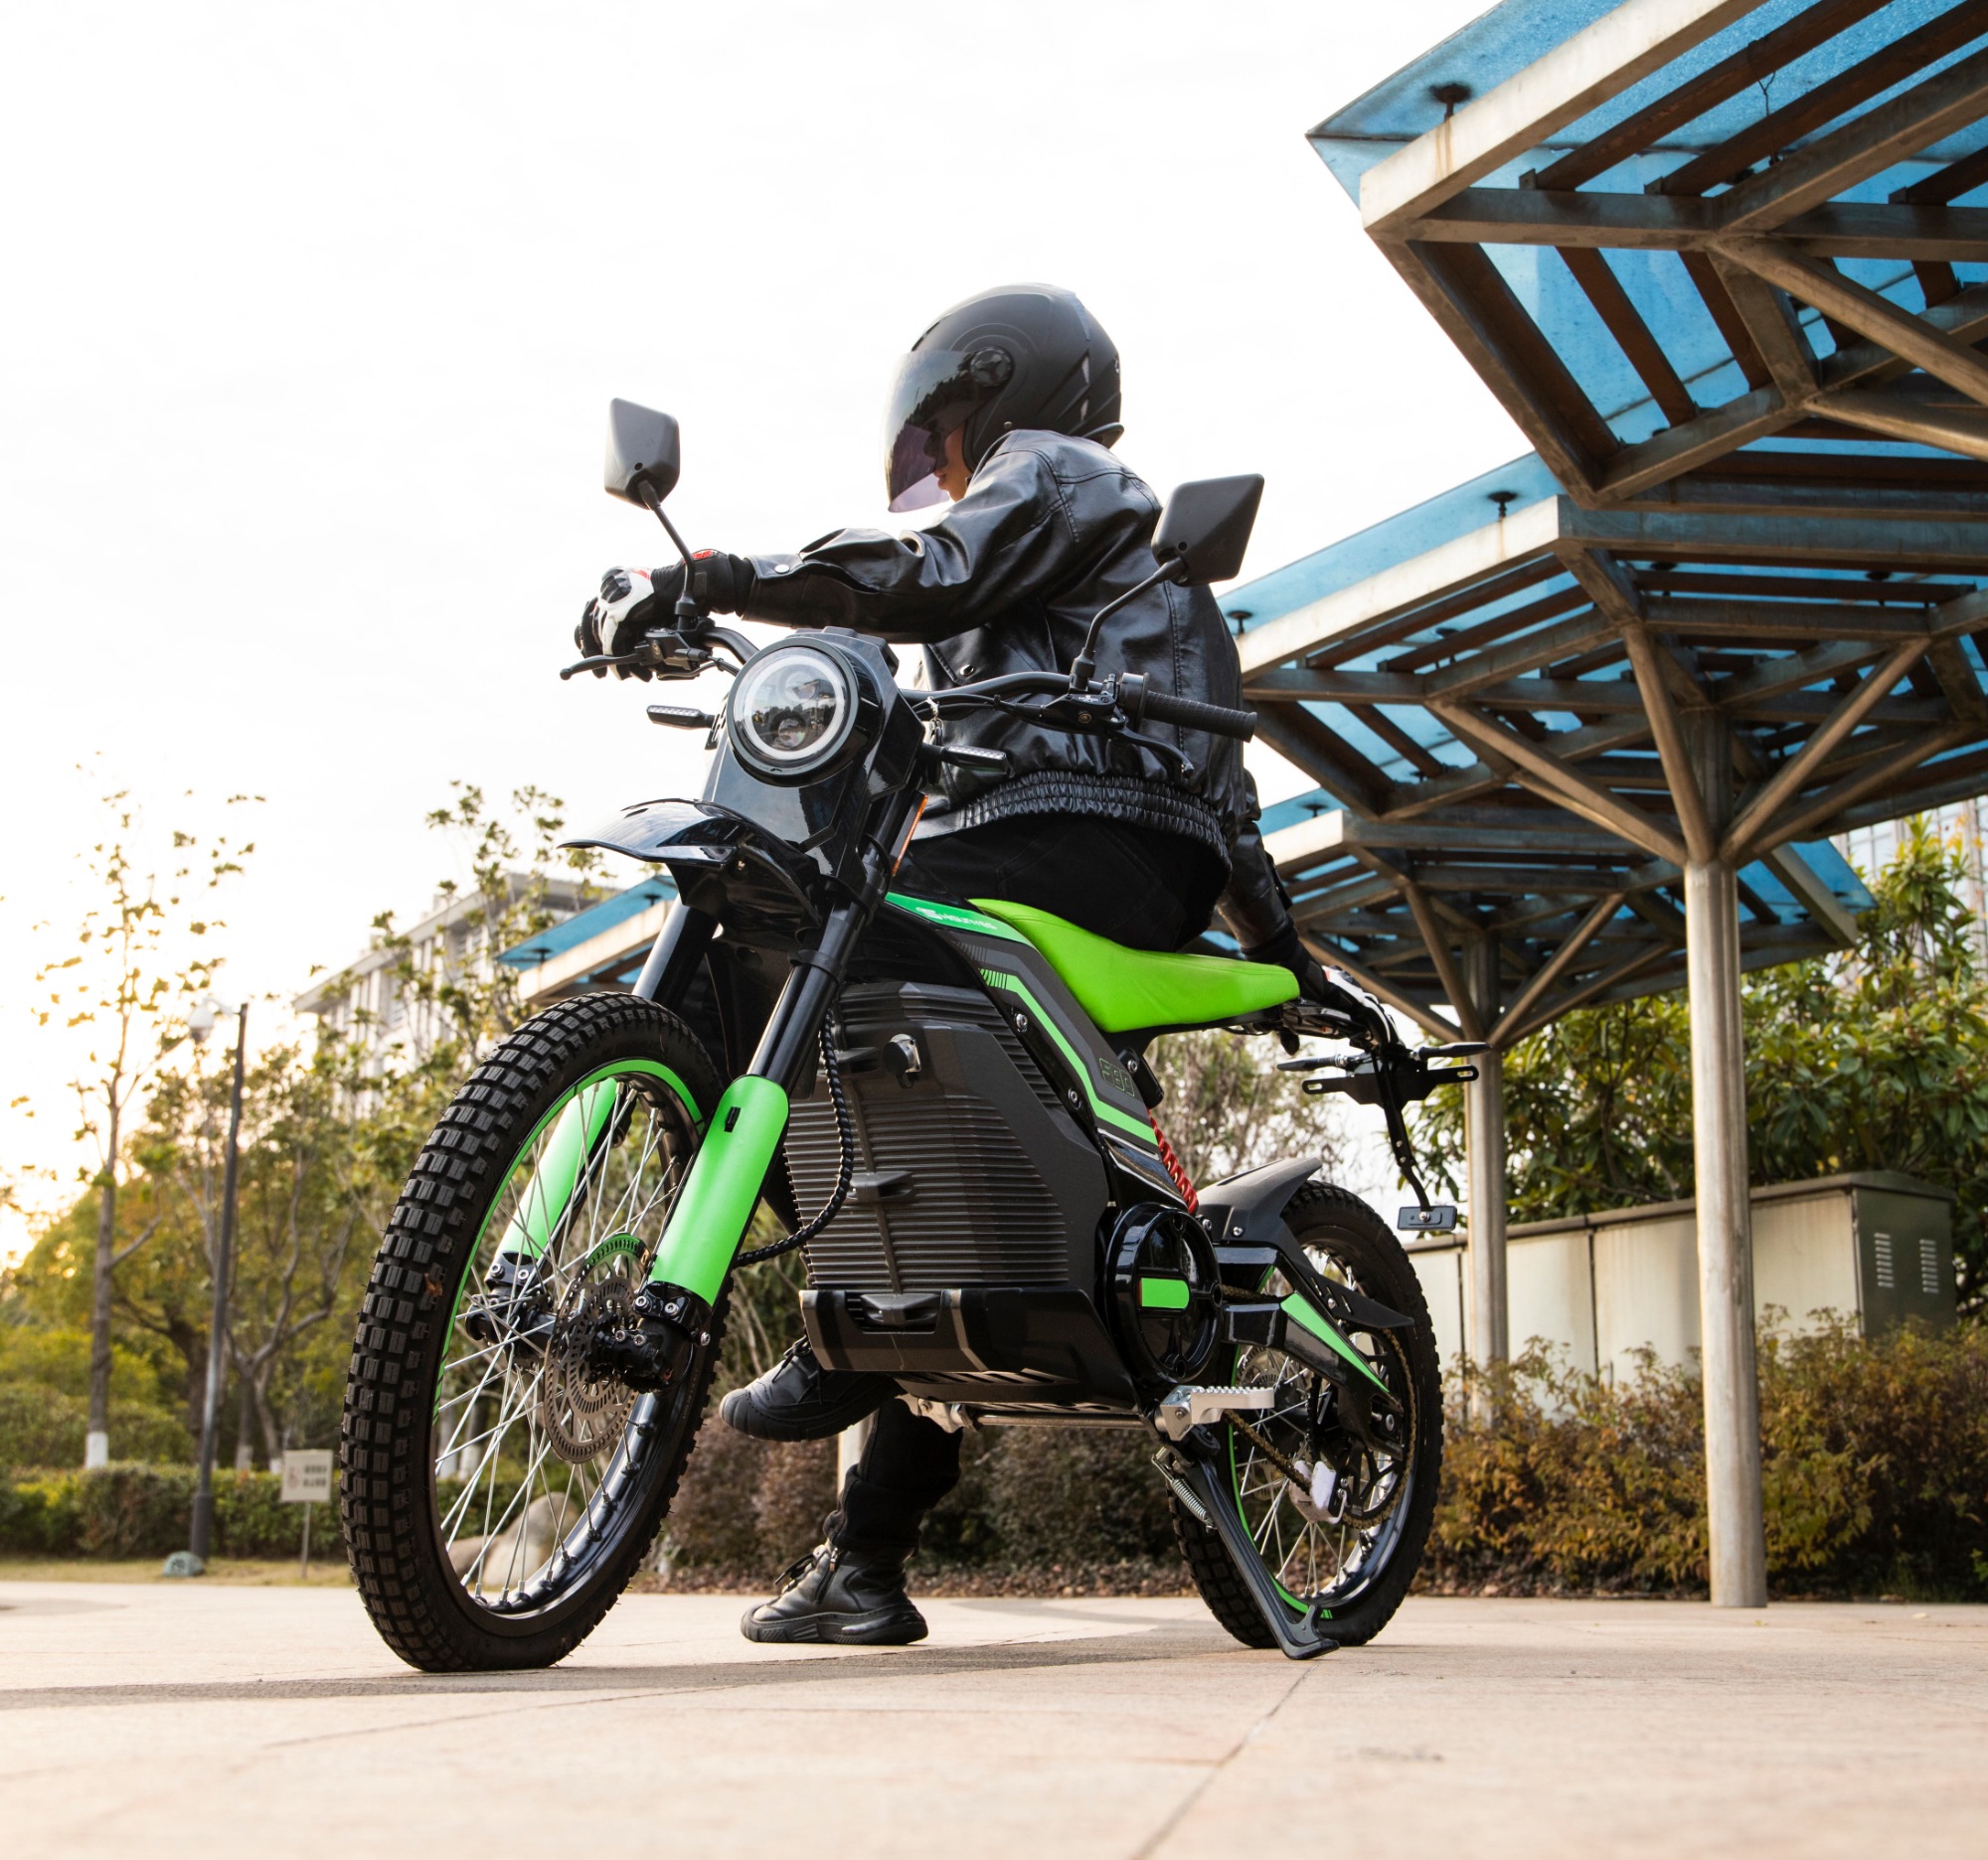 S80 road electric motorcycle